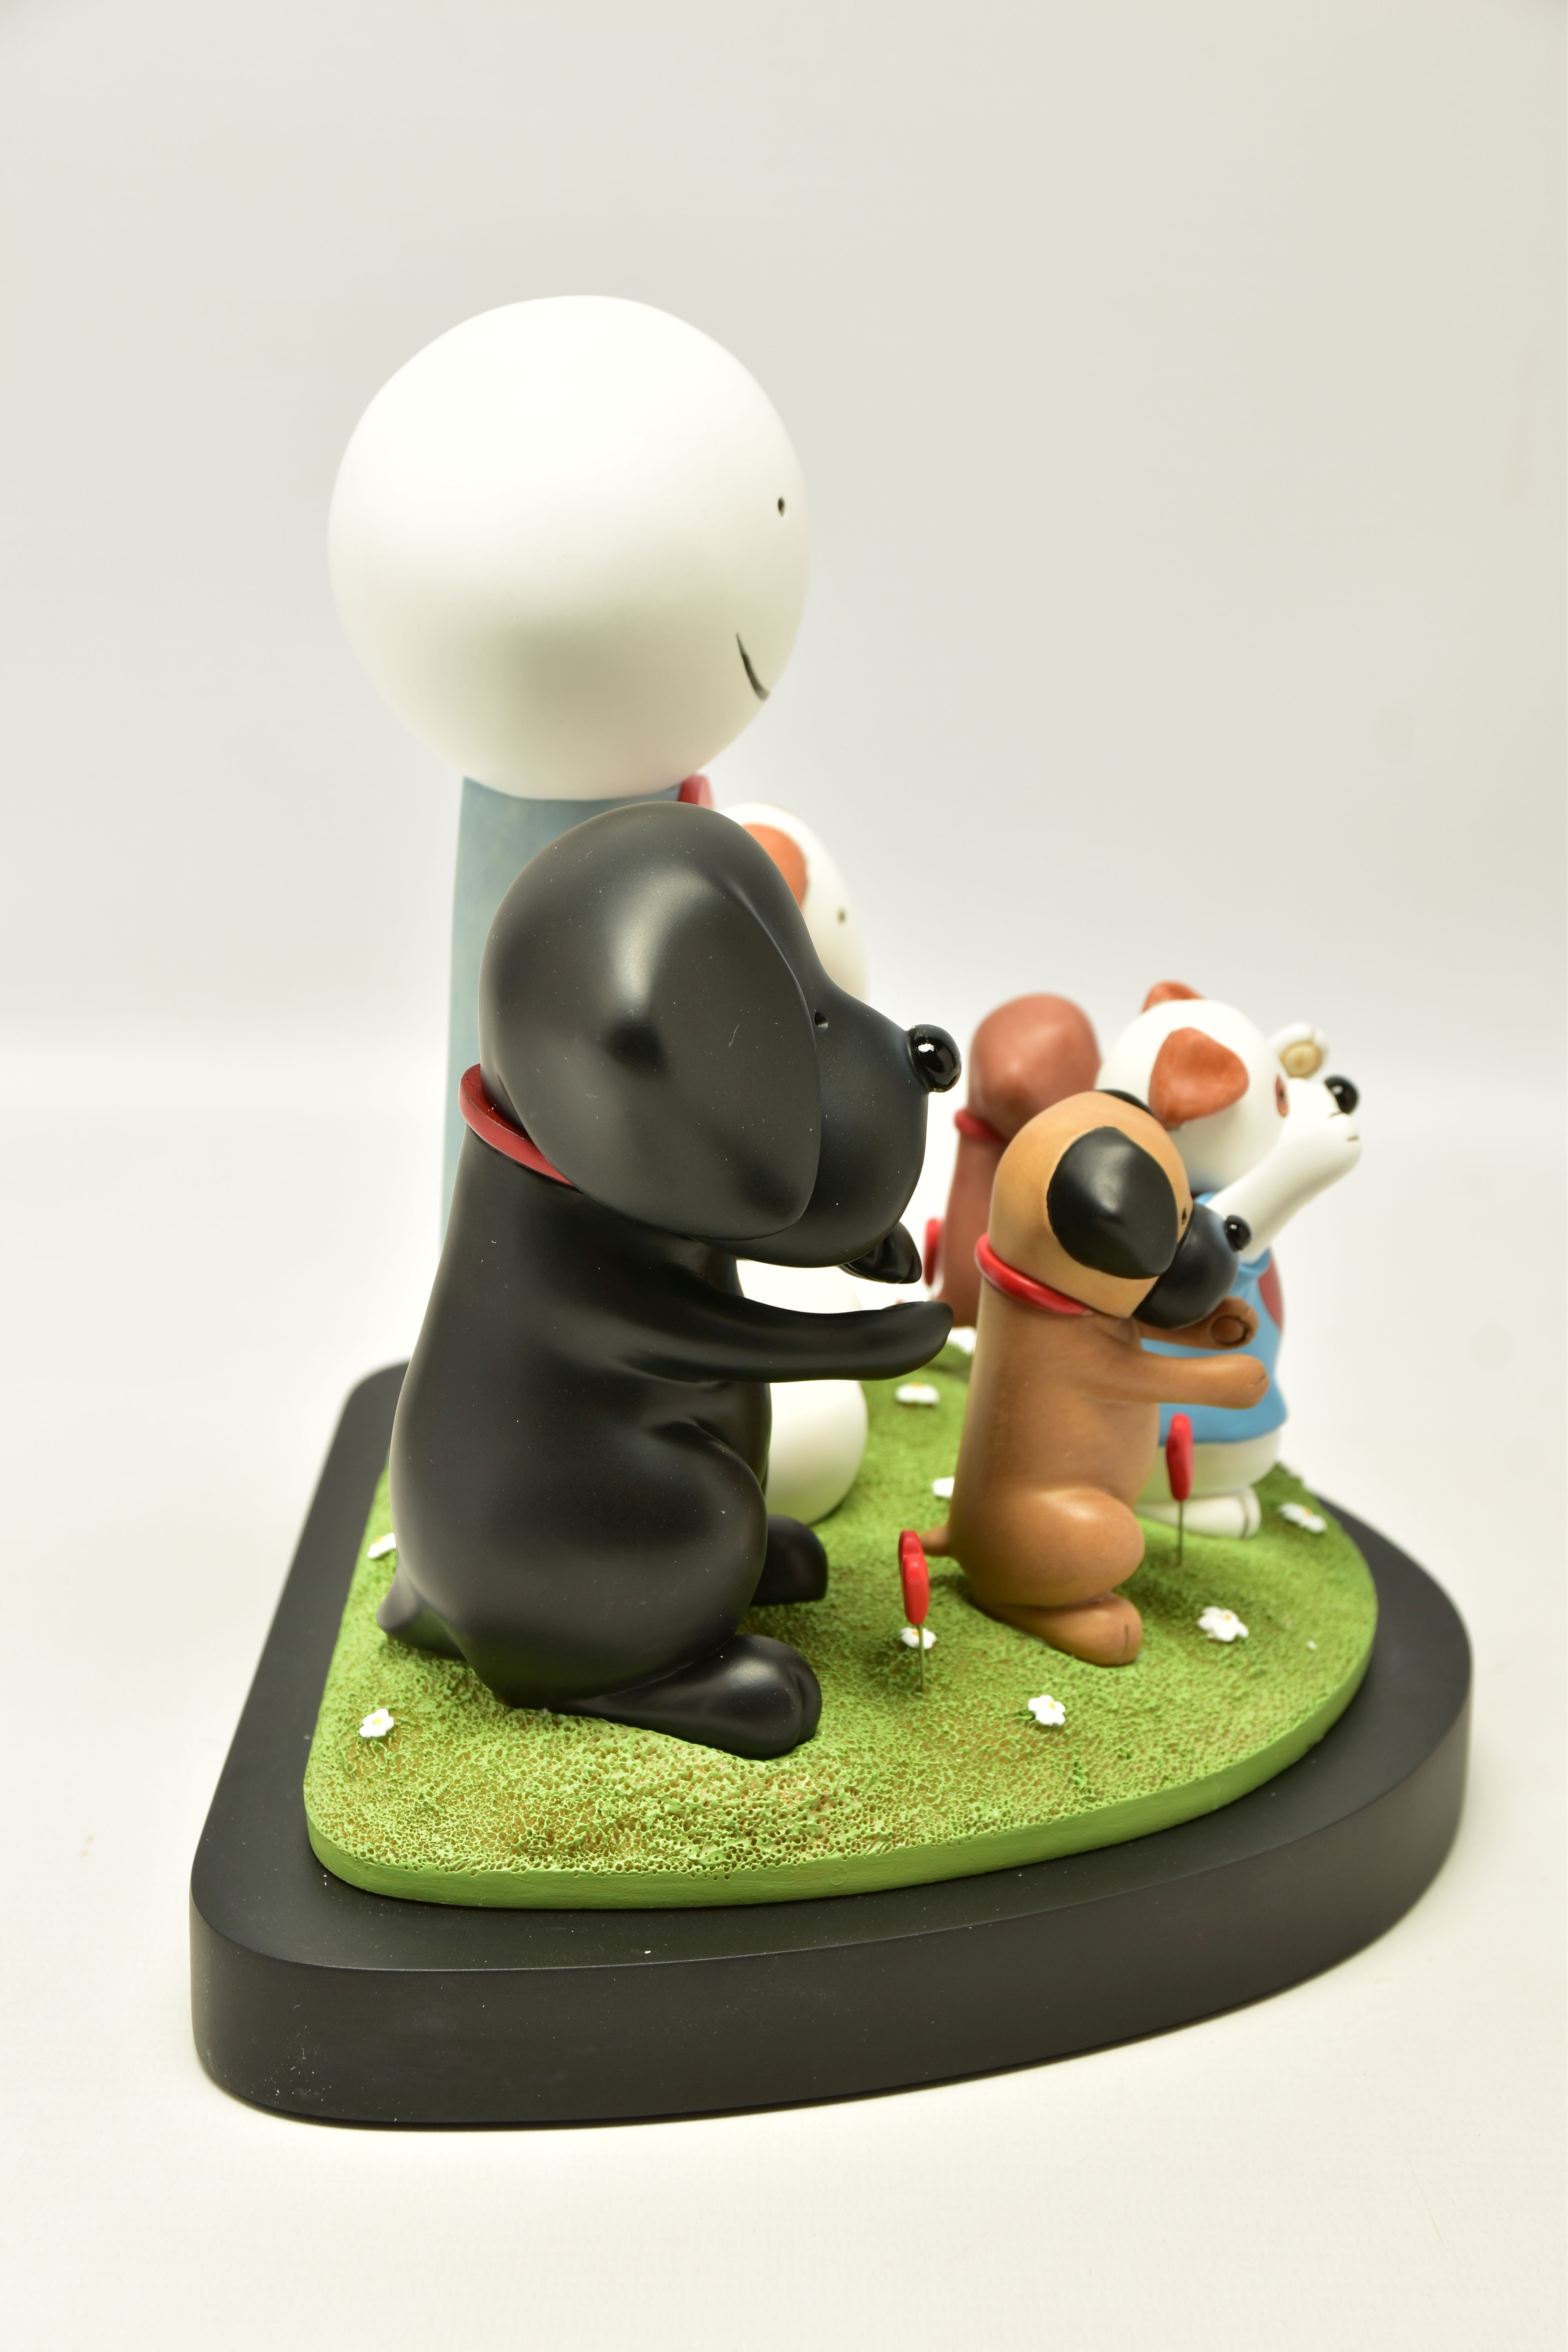 DOUG HYDE (BRITISH 1972) 'THANK YOU' a limited edition sculpture in recognition of NHS workers 124/ - Image 4 of 9